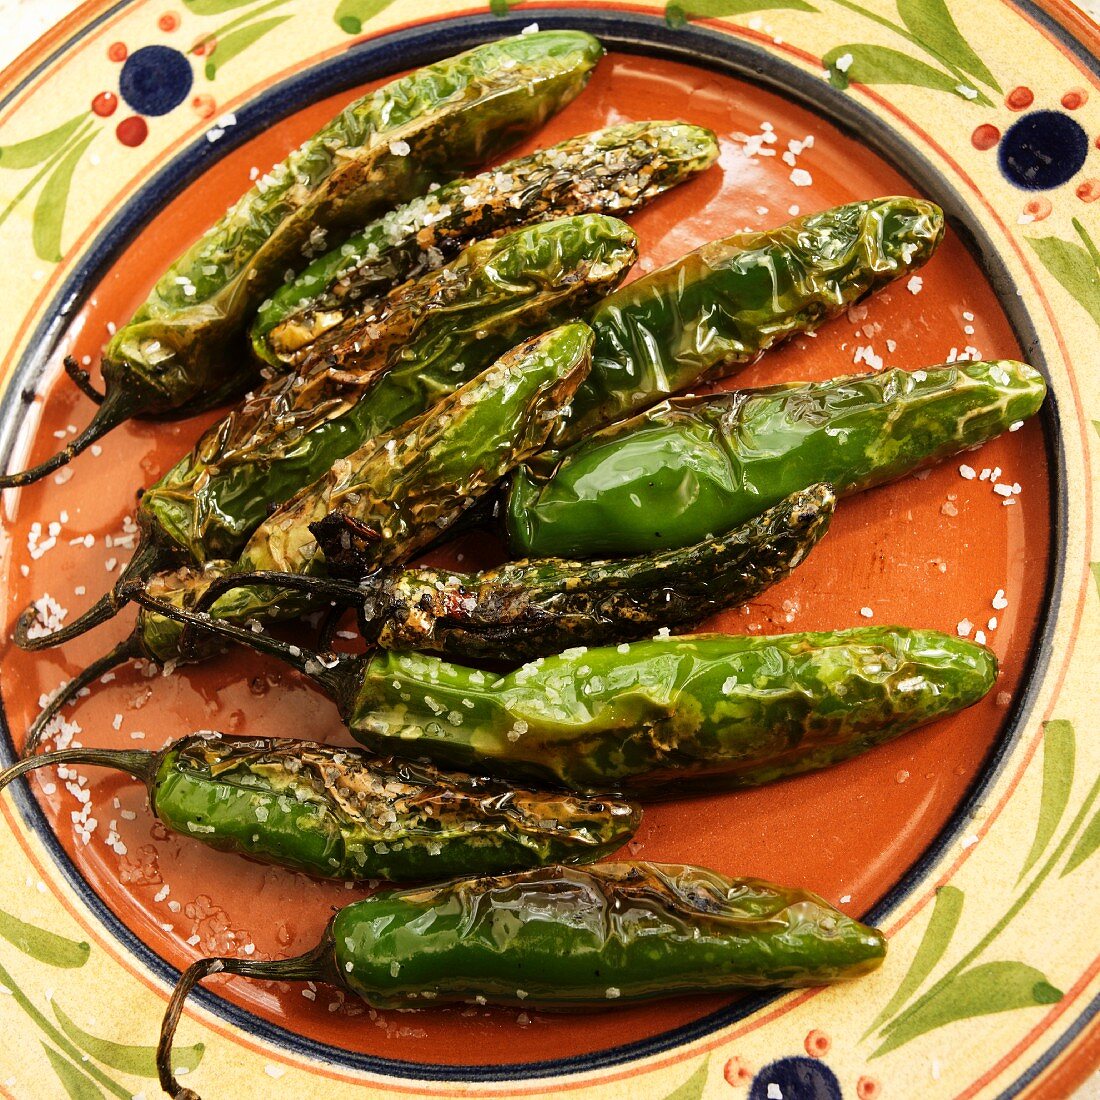 Pimentos Fritos; Fried Green Chilies with Salt